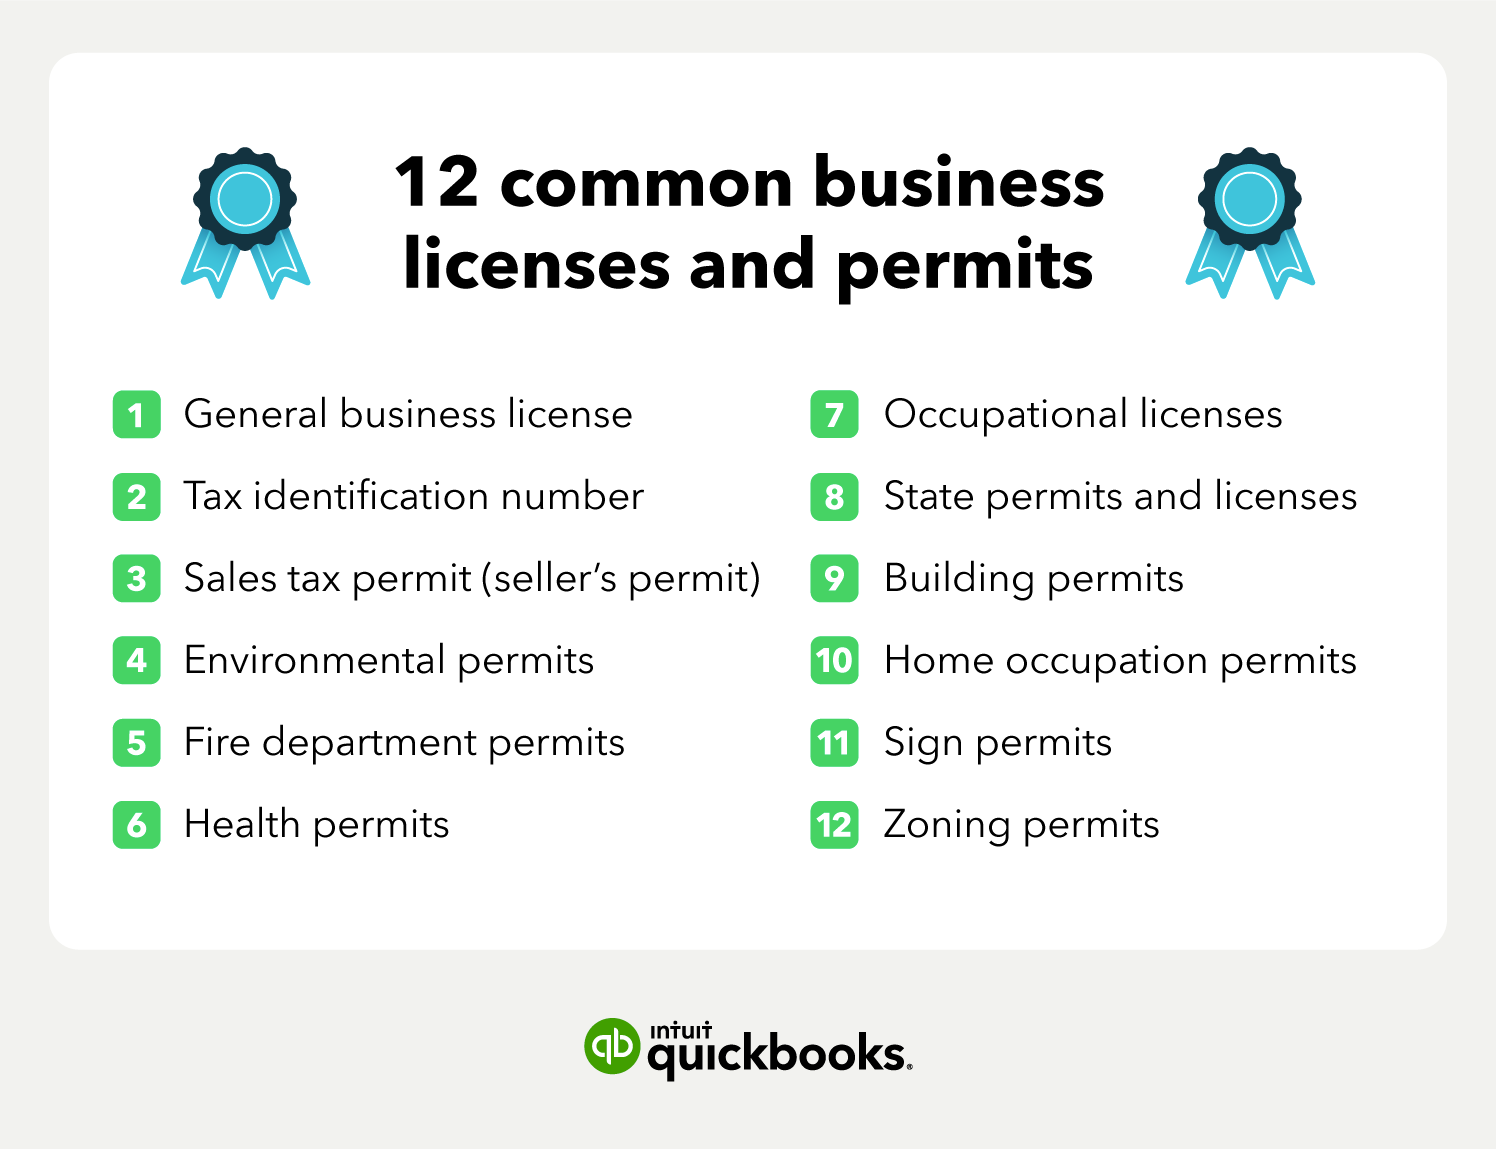 The 12 common types of business permits and licenses